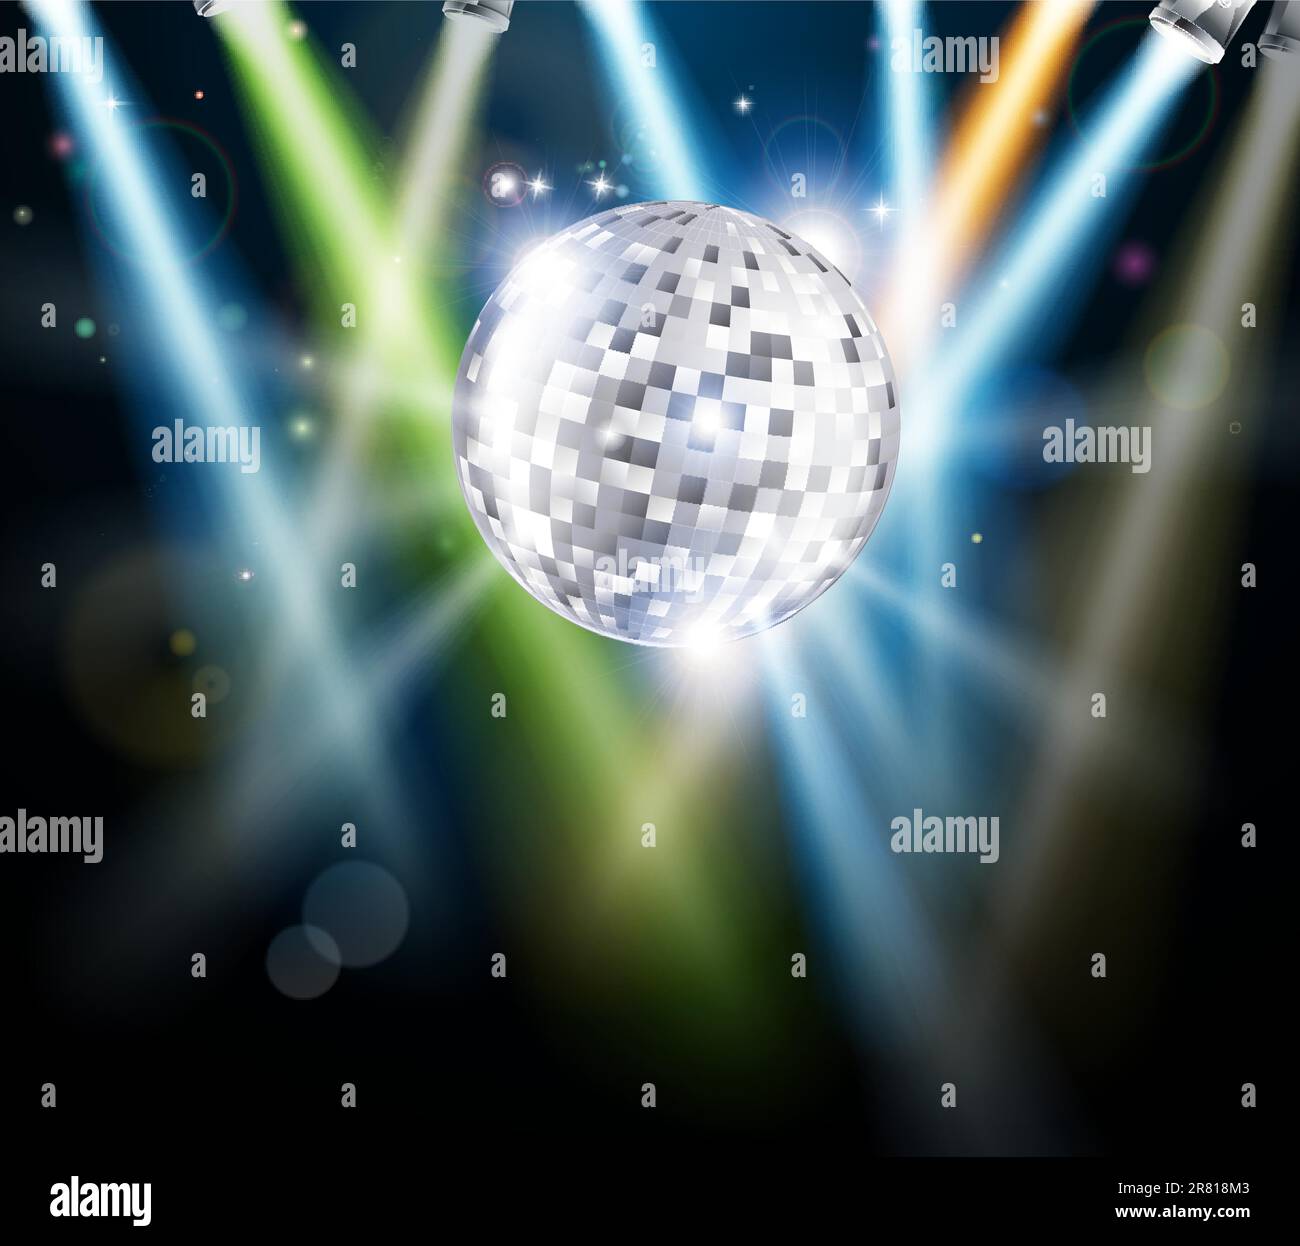 Sticker disco ball with lights - retro party background 